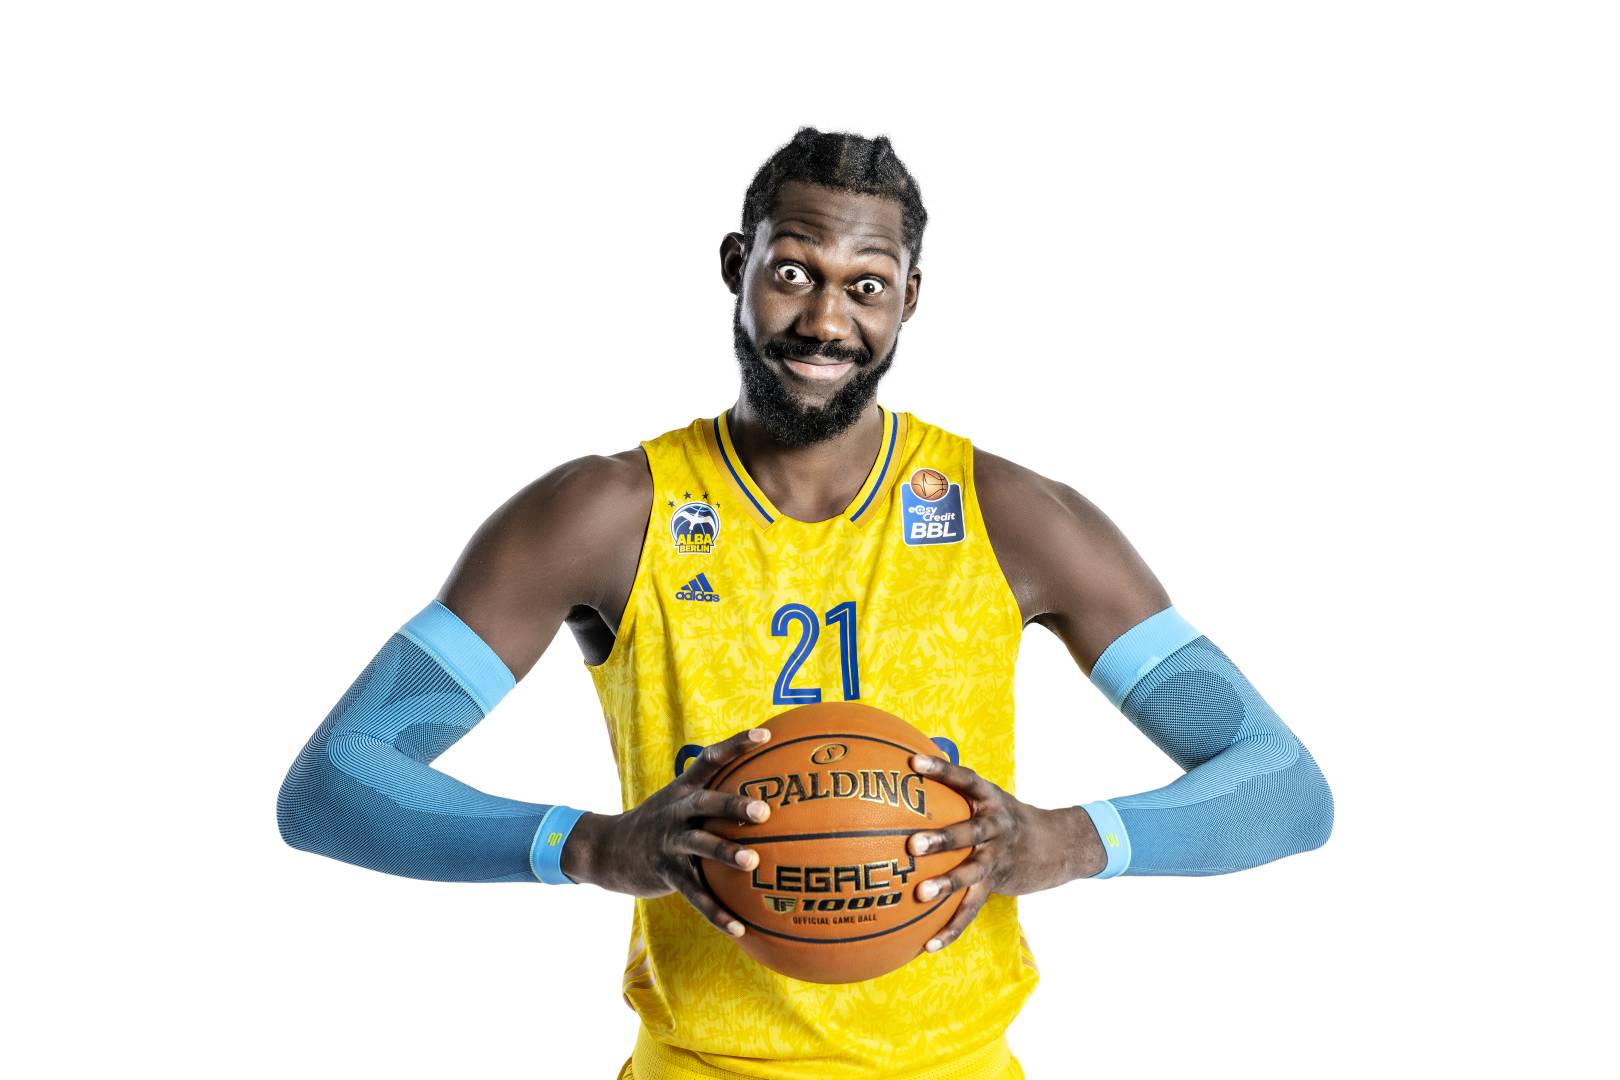 Alba Berlin player holds basketball between his hands and wears an arm sleeve